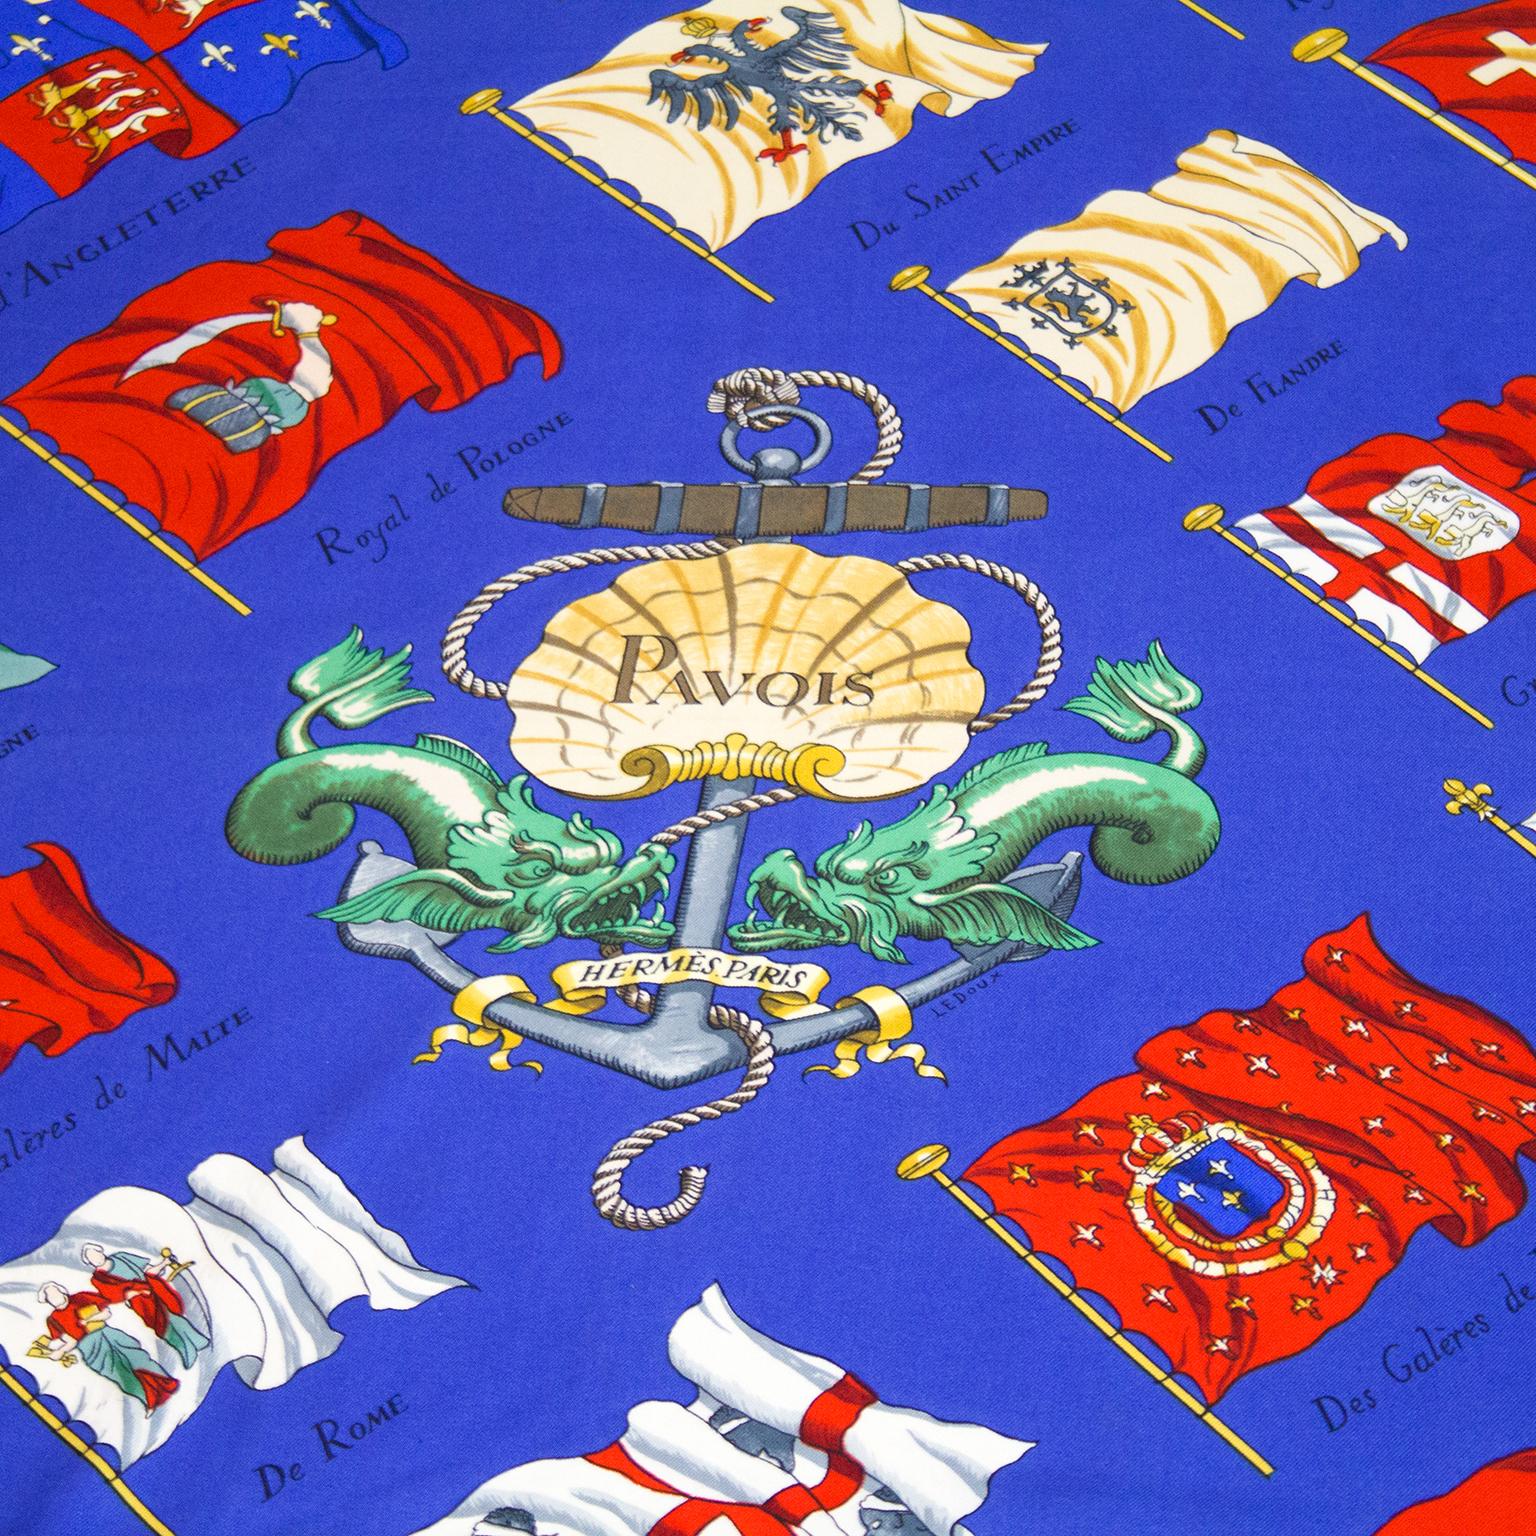 Designed by Philippe LeDoux in 1964, the scarf is a bright blue background with a multicultural nautical flag pattern surrounding an anchor with a shell, dragon fish and rope. In excellent condition, 100% silk, 35” square. Signed throughout design. 